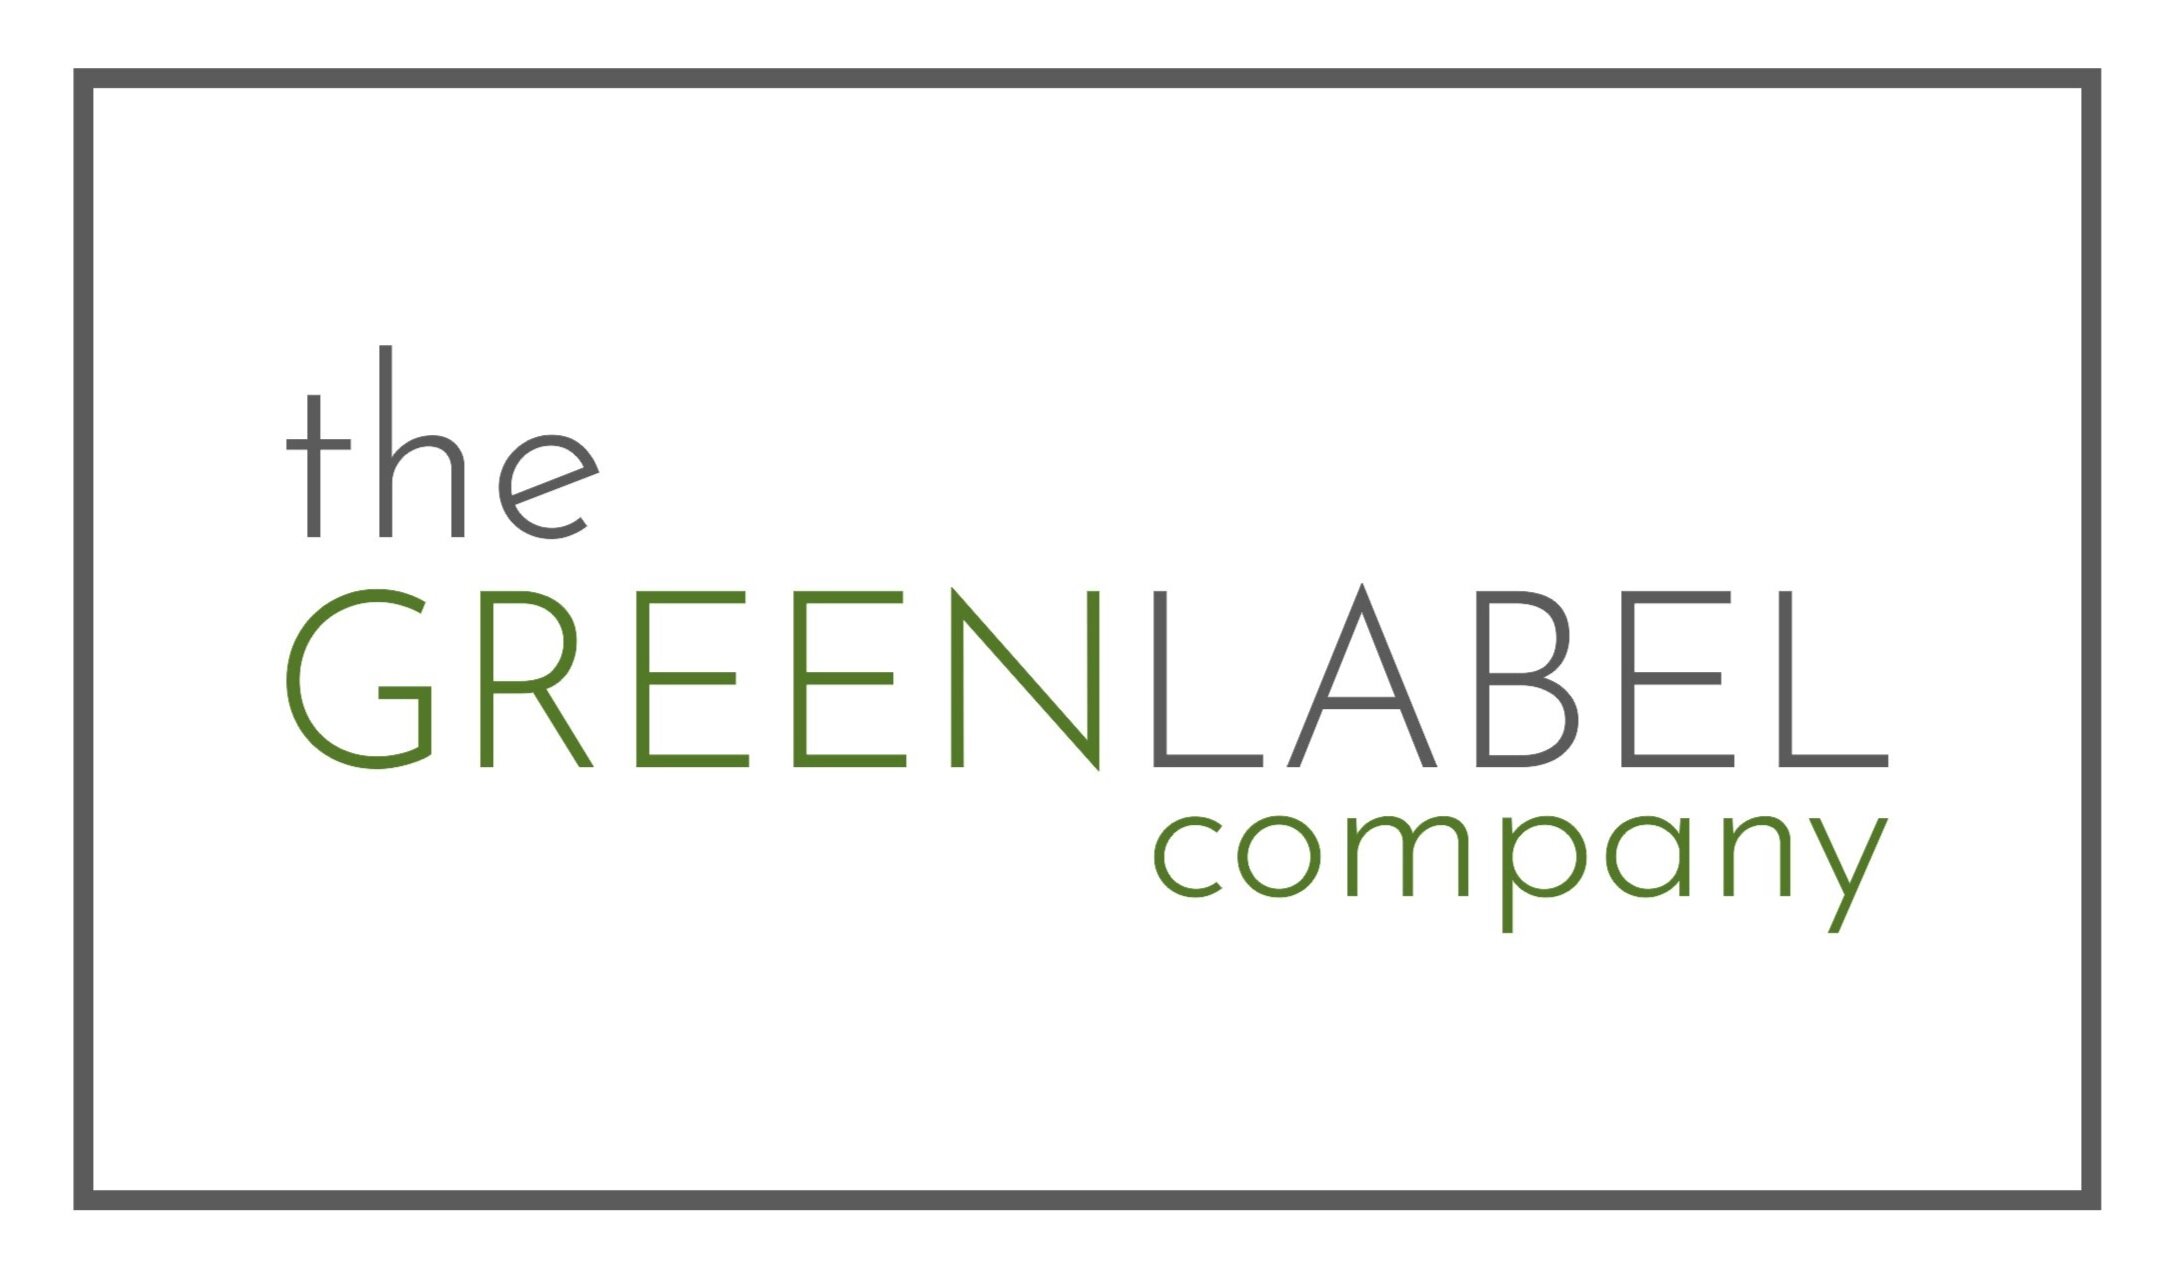 the GREEN LABEL company